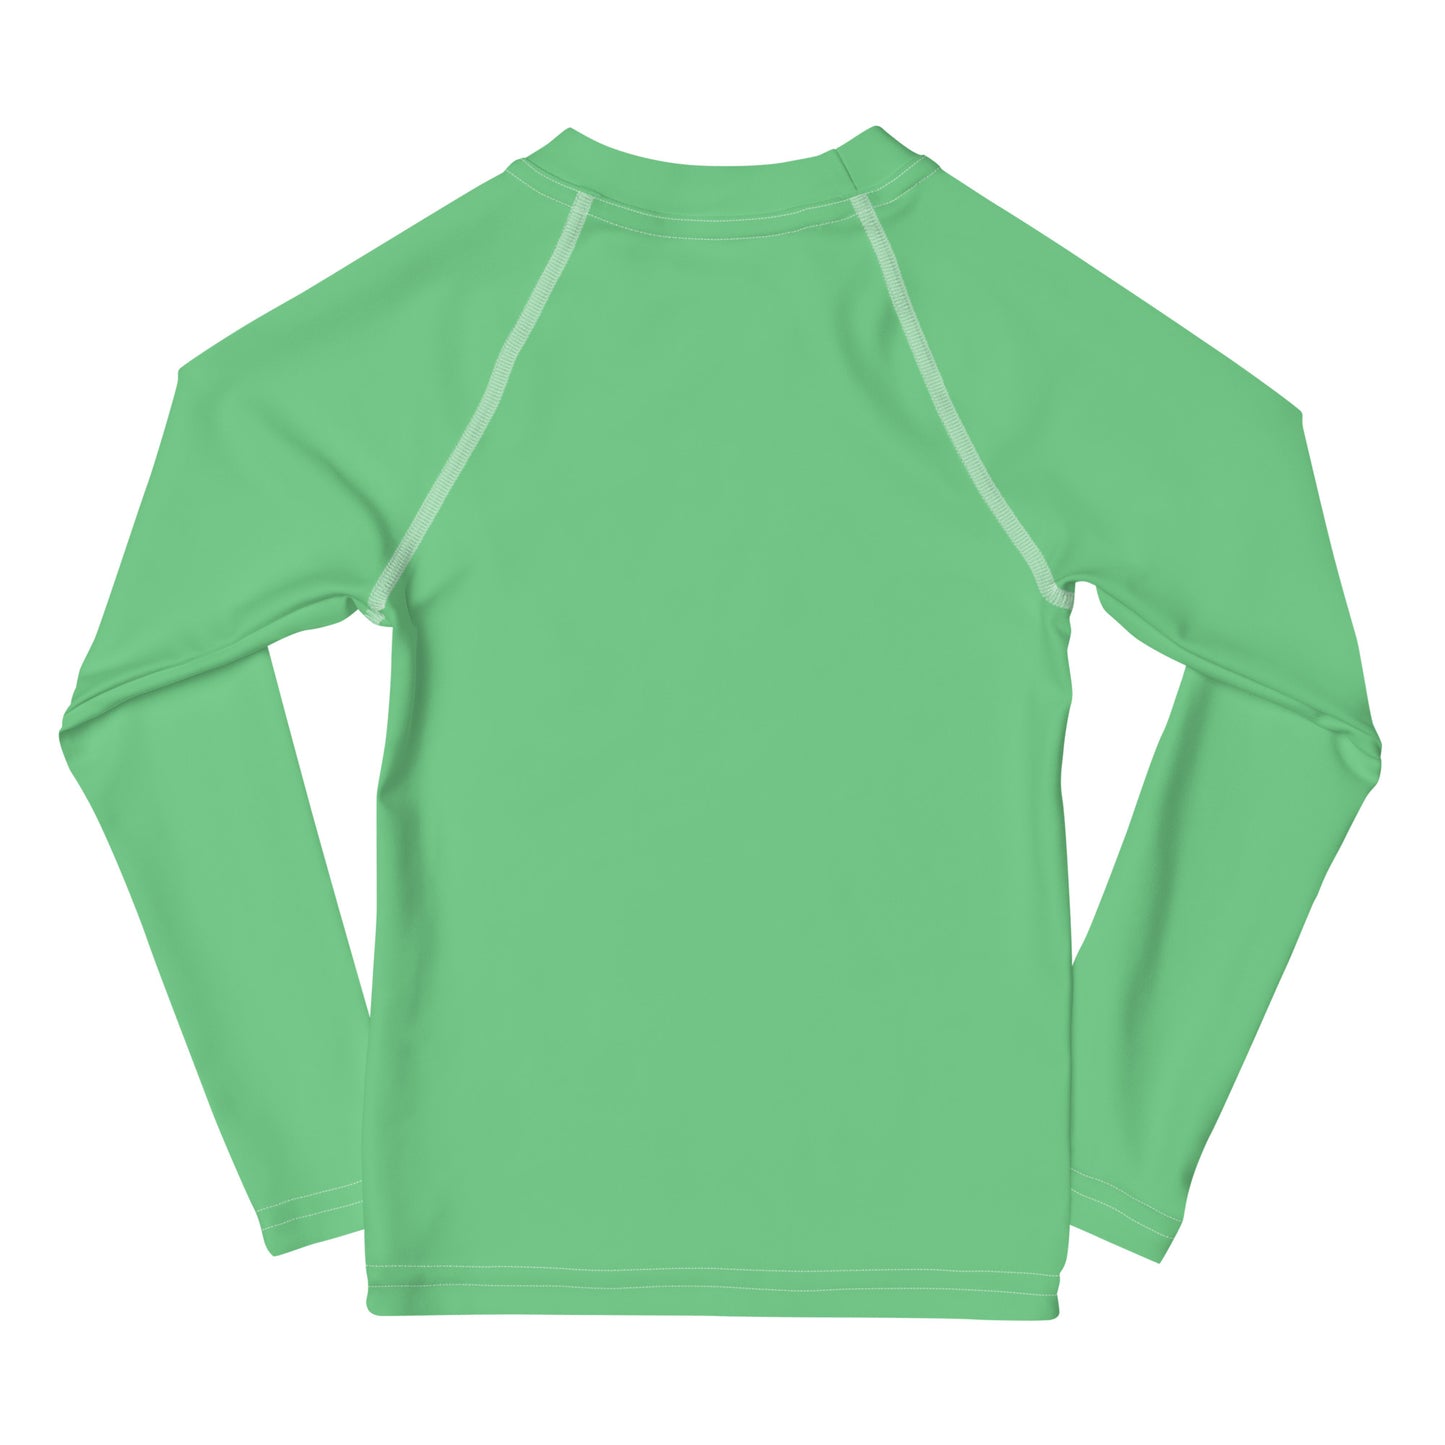 Emerald Climate Change Global Warming Statement - Sustainably Made Kid's Long Sleeve Tee